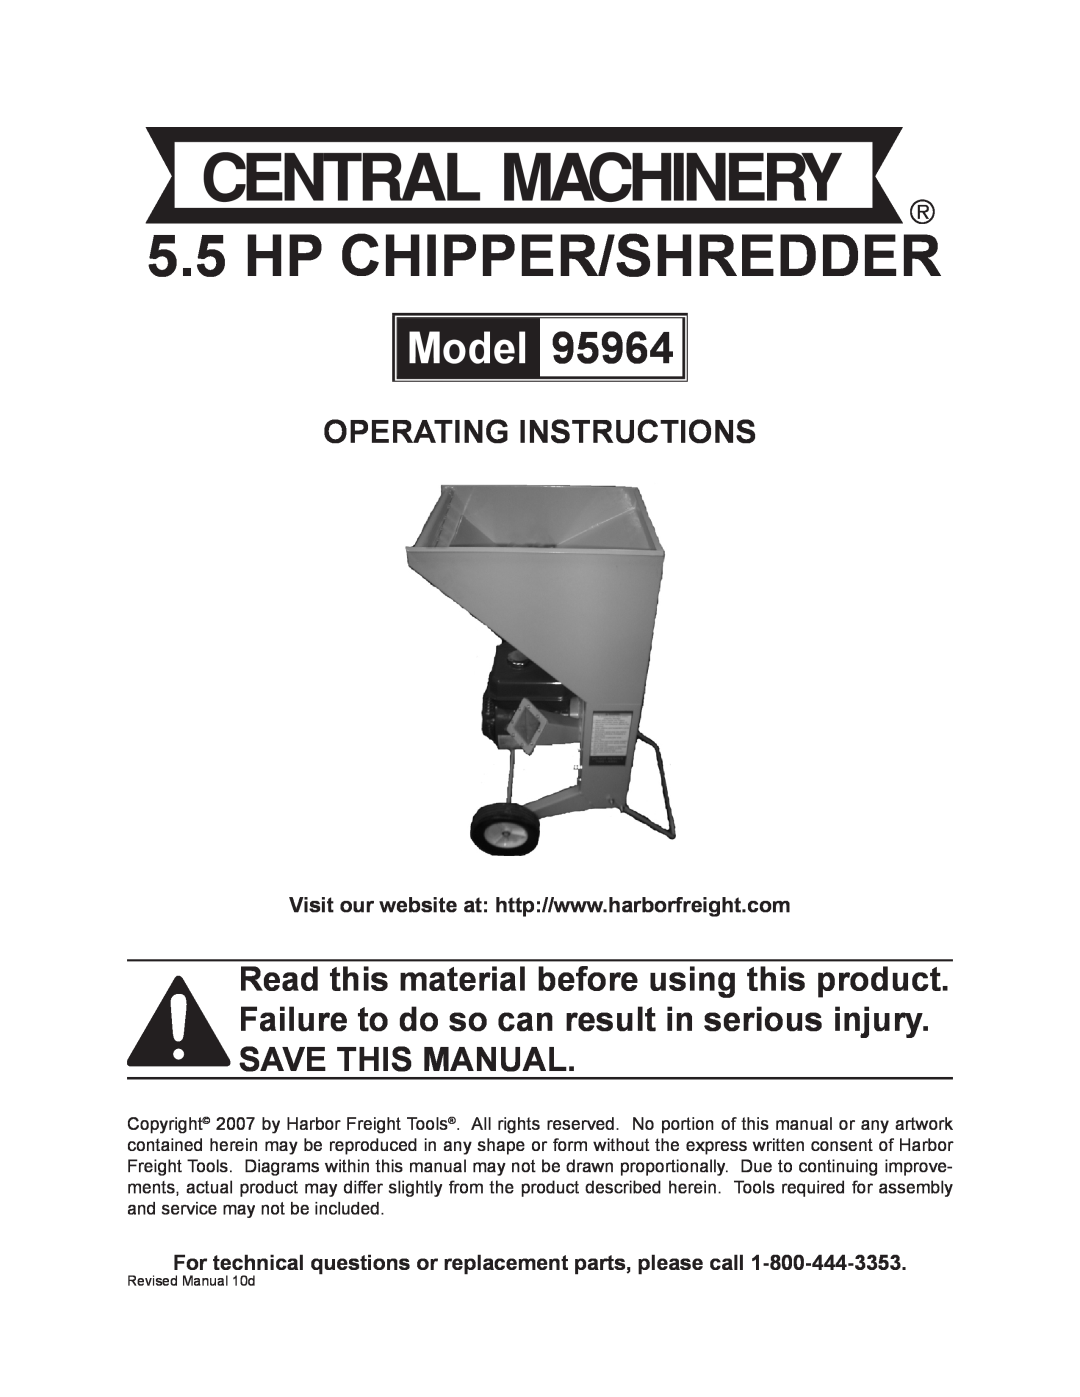 Harbor Freight Tools 95964 operating instructions Operating Instructions, hp chipper/shredder, Model 